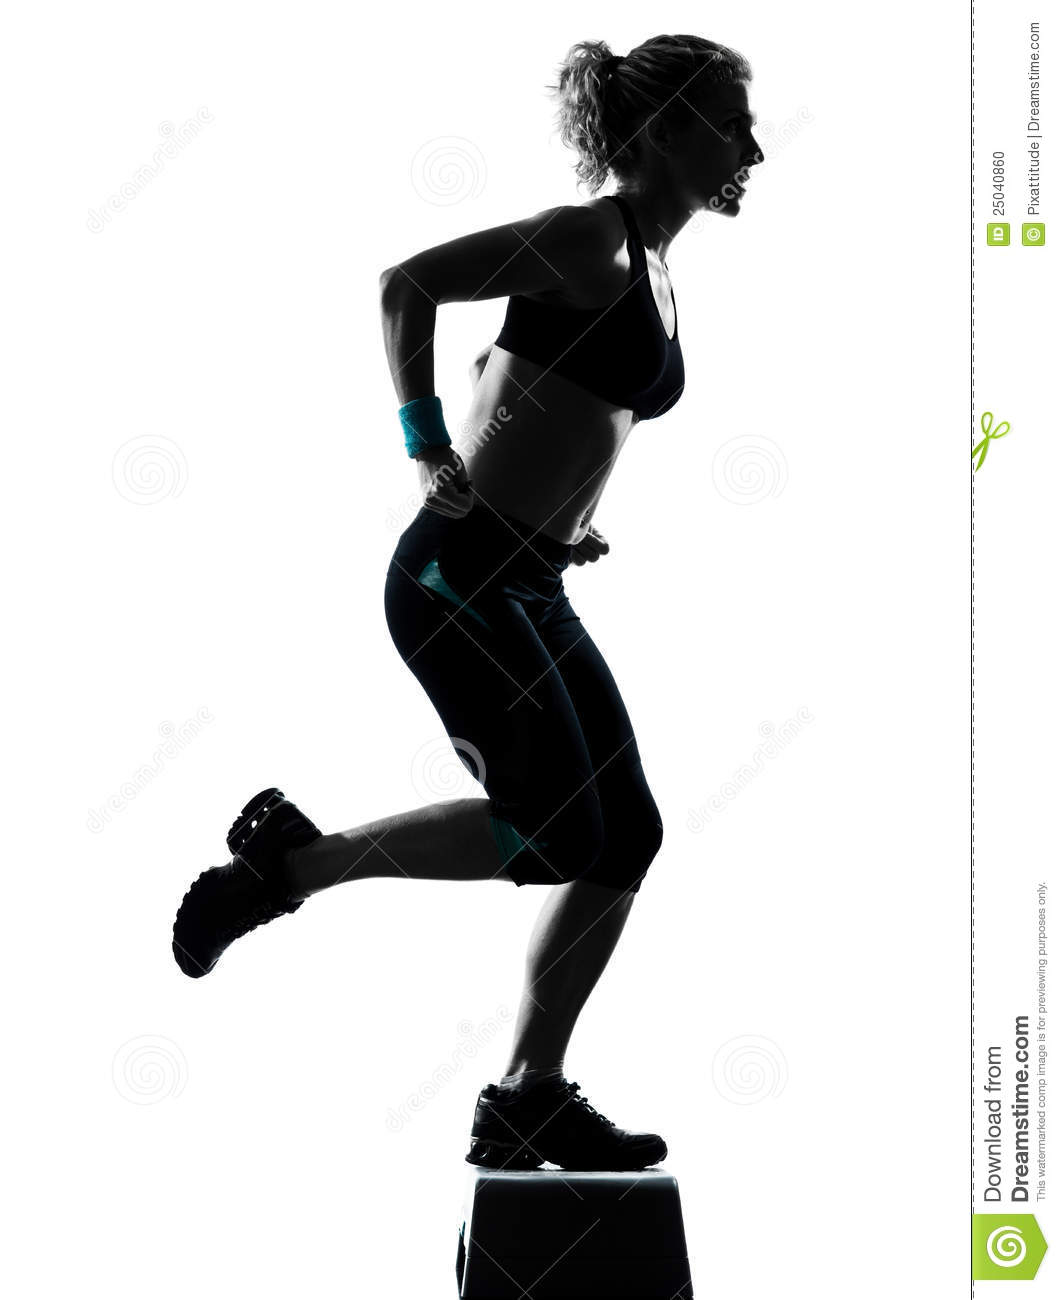 One Woman Exercising Workout Fitness Aerobic Exercise Posture On